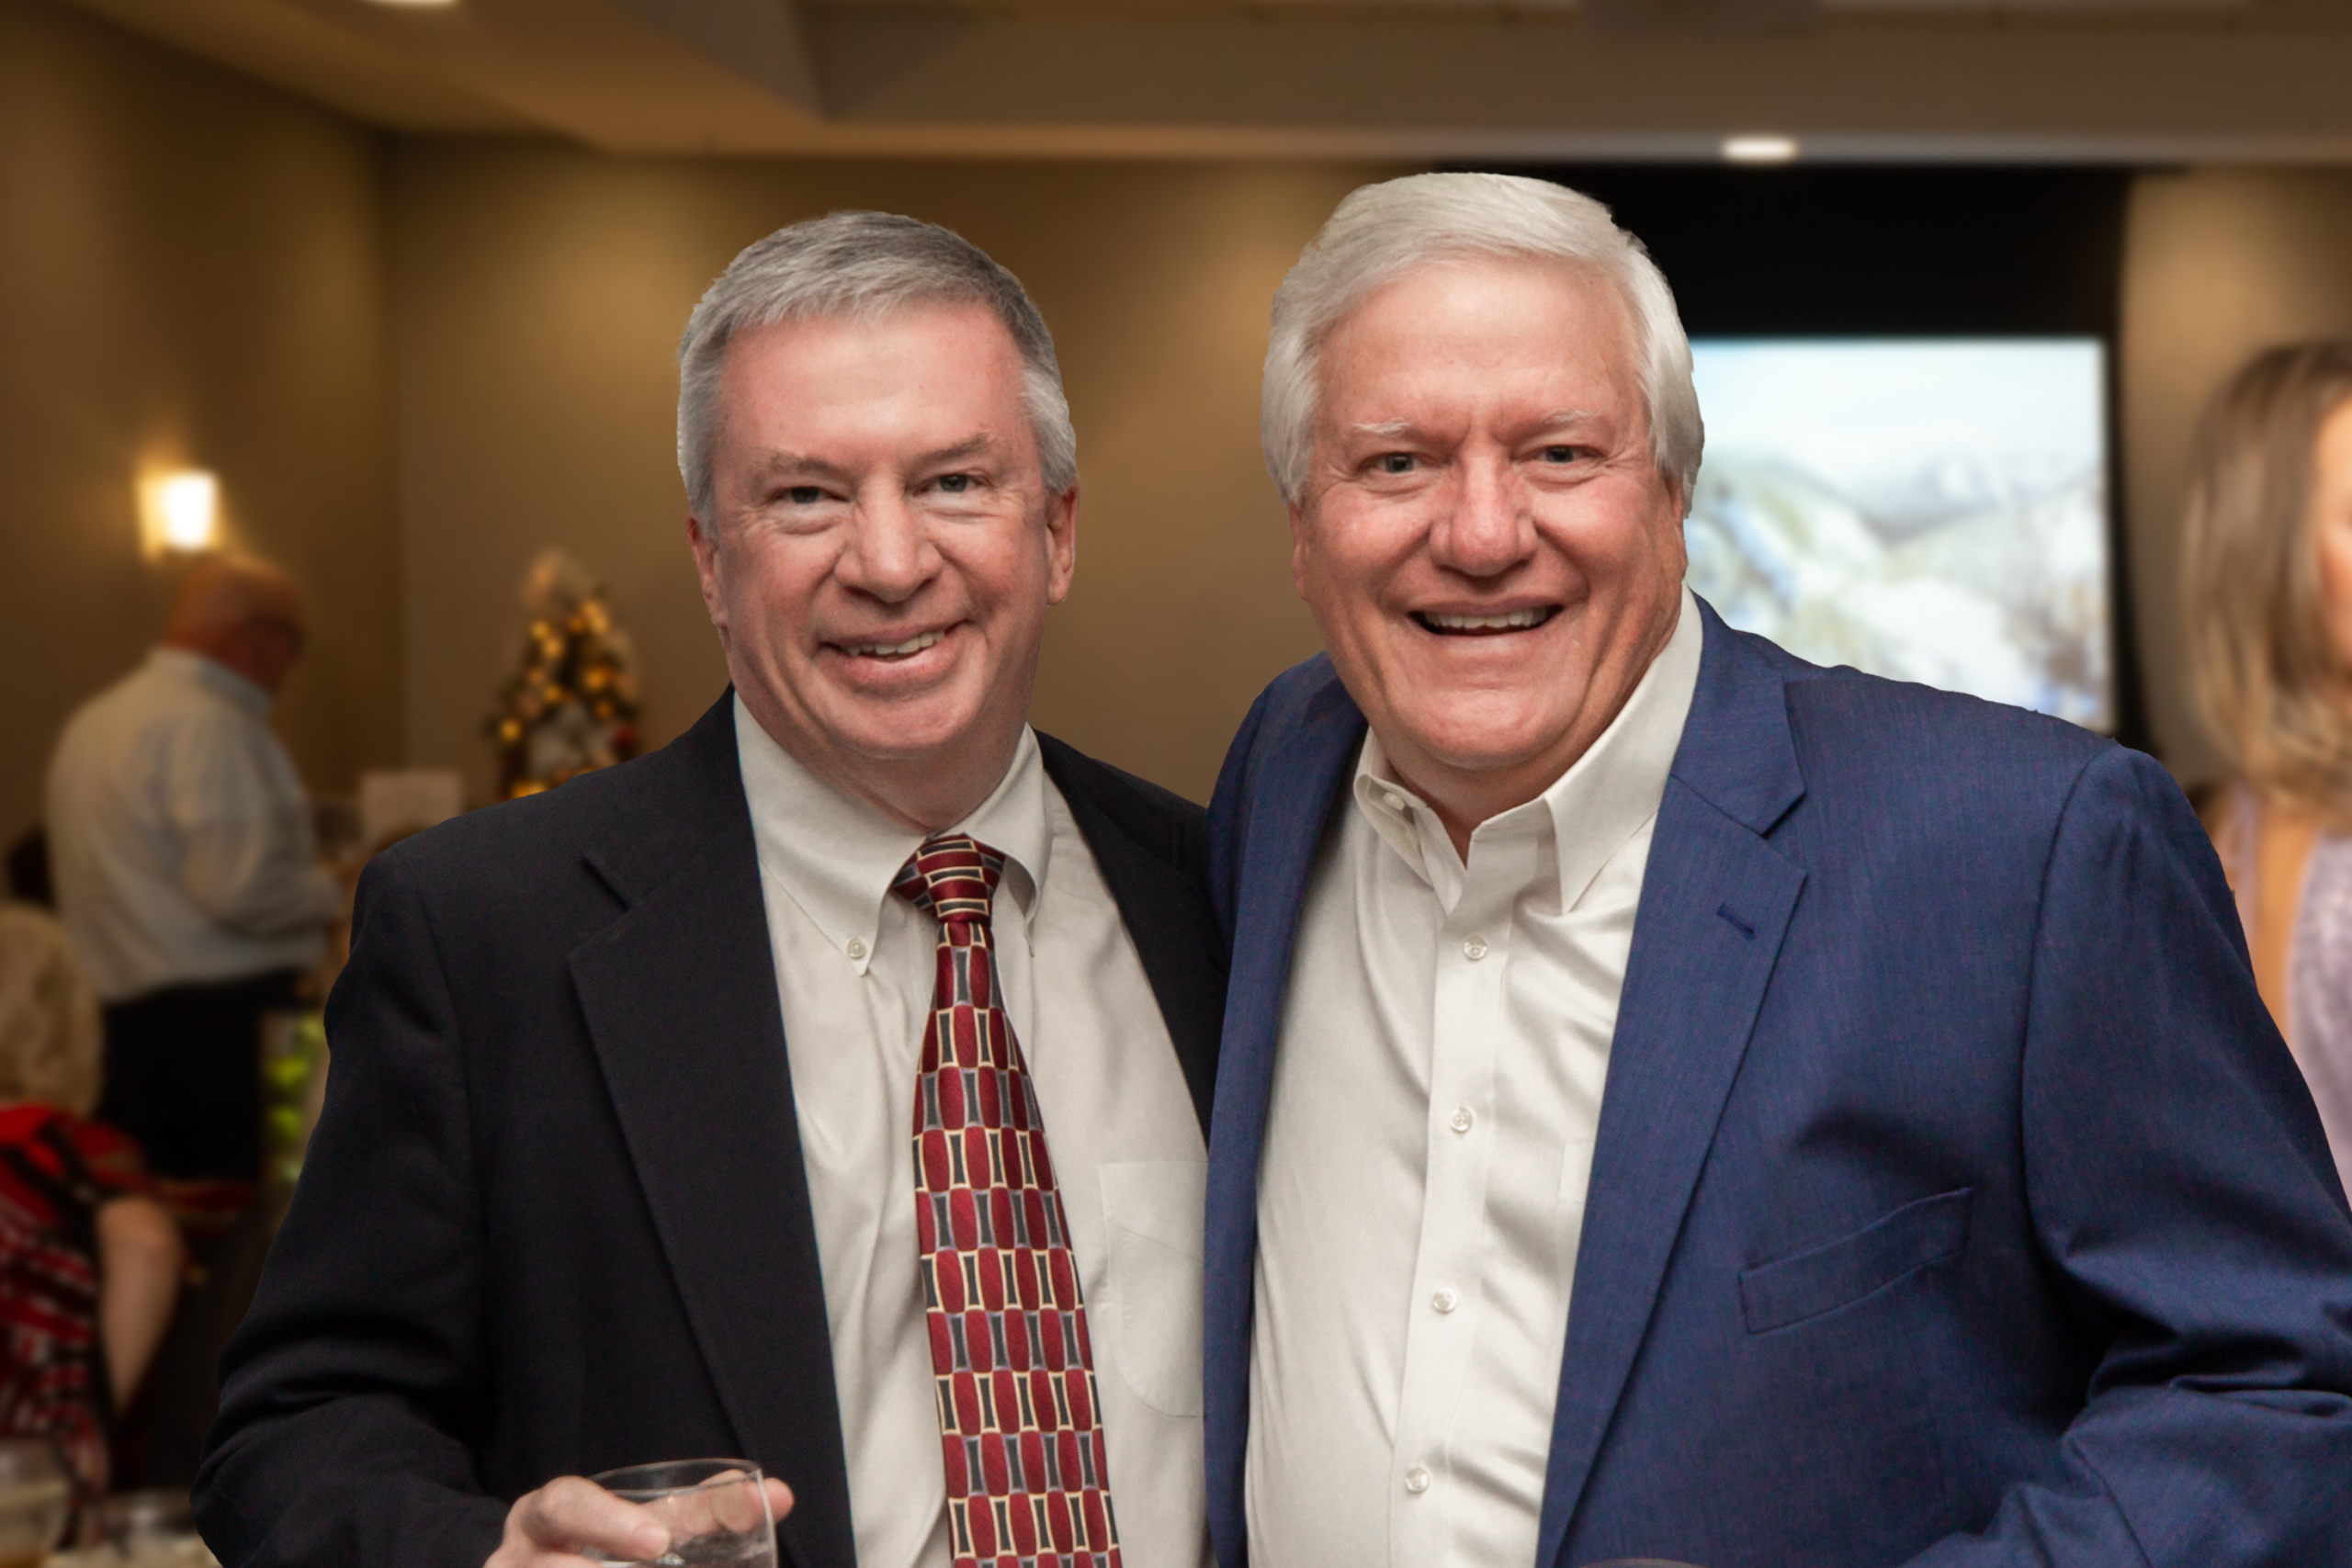 Thank you to our leaders, Broker-in-Charge and Vice President Jim Parker and John Jobson